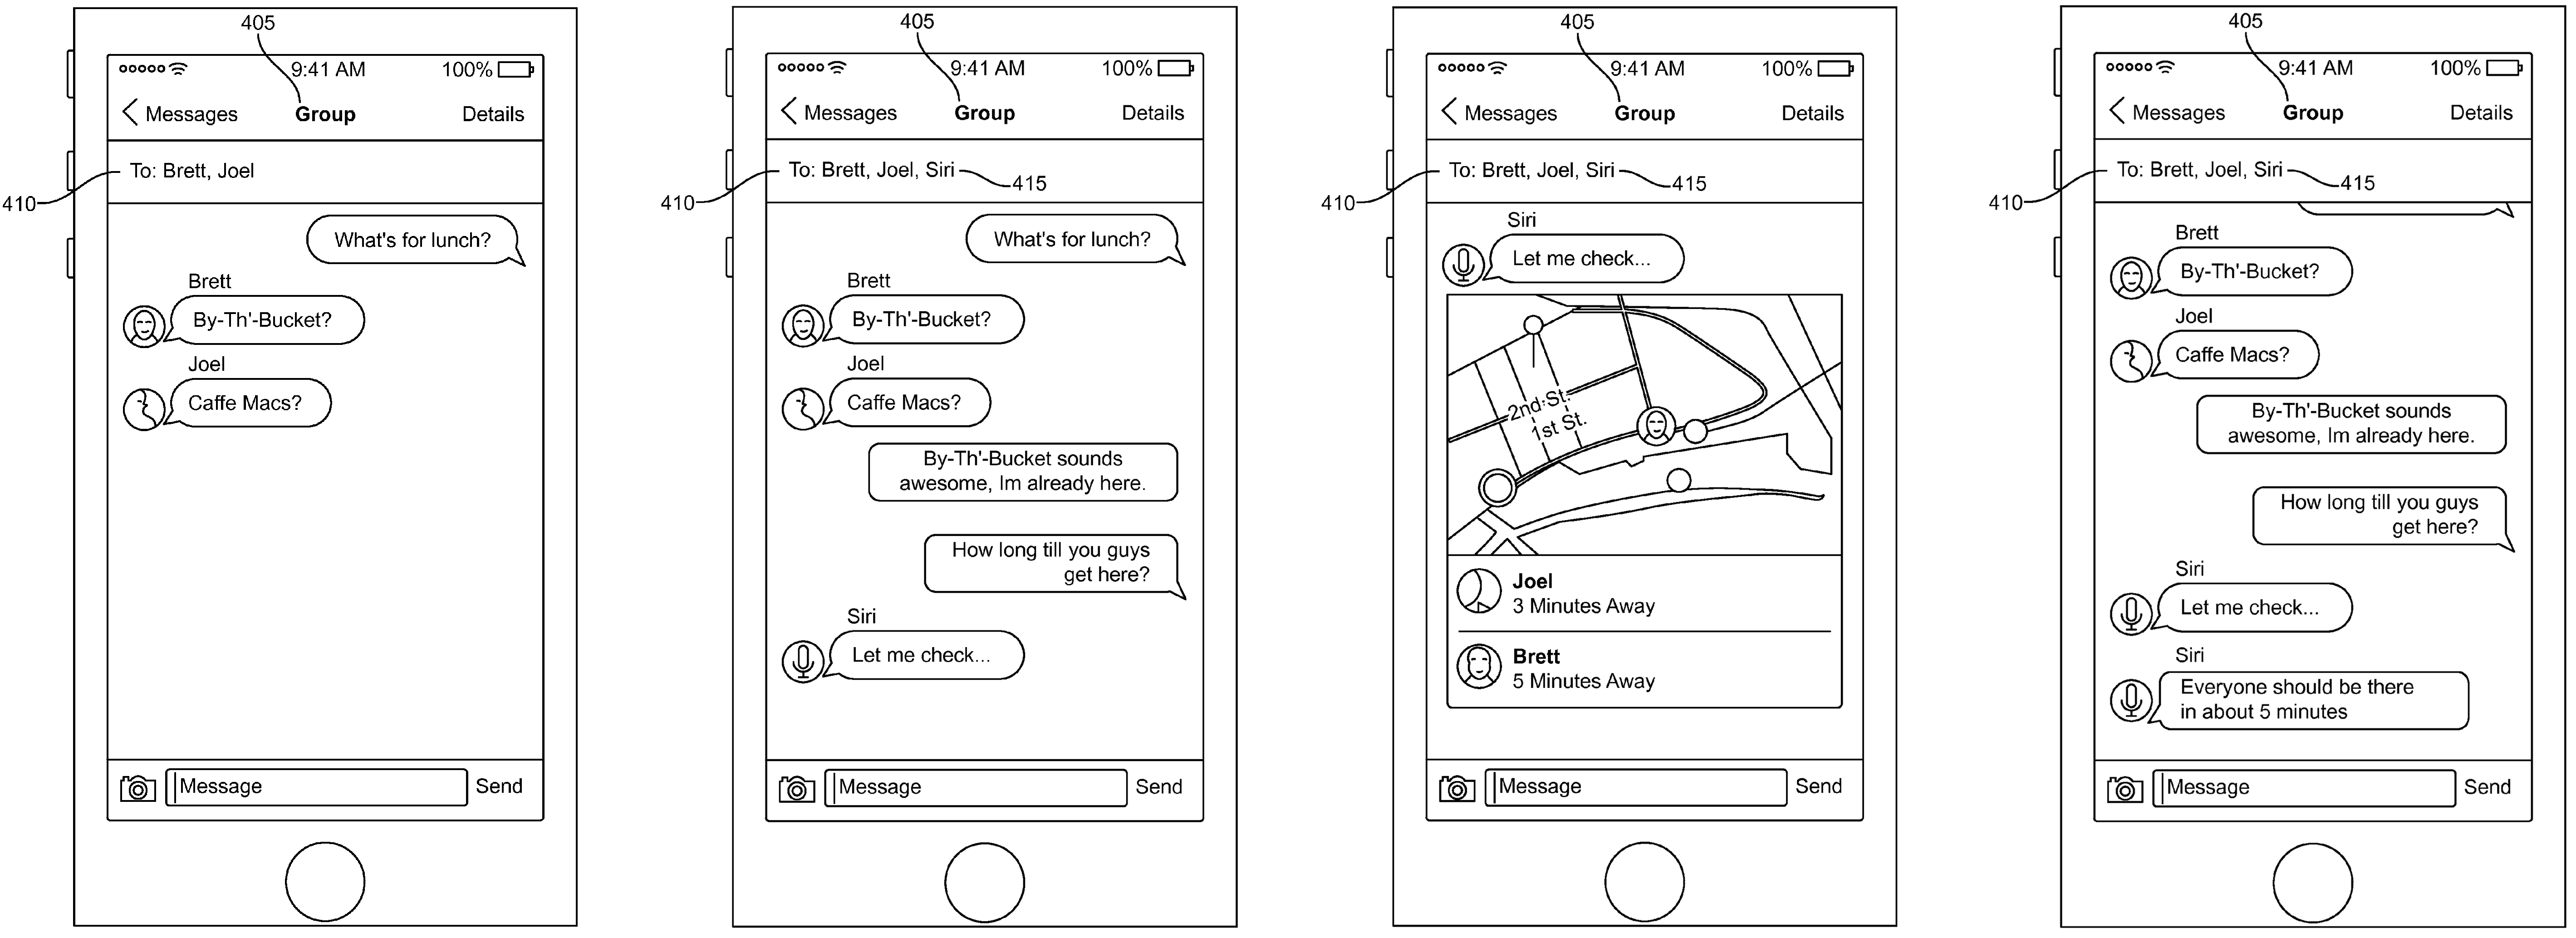 Apple patent Siri Messages chat bot integration drawing 001